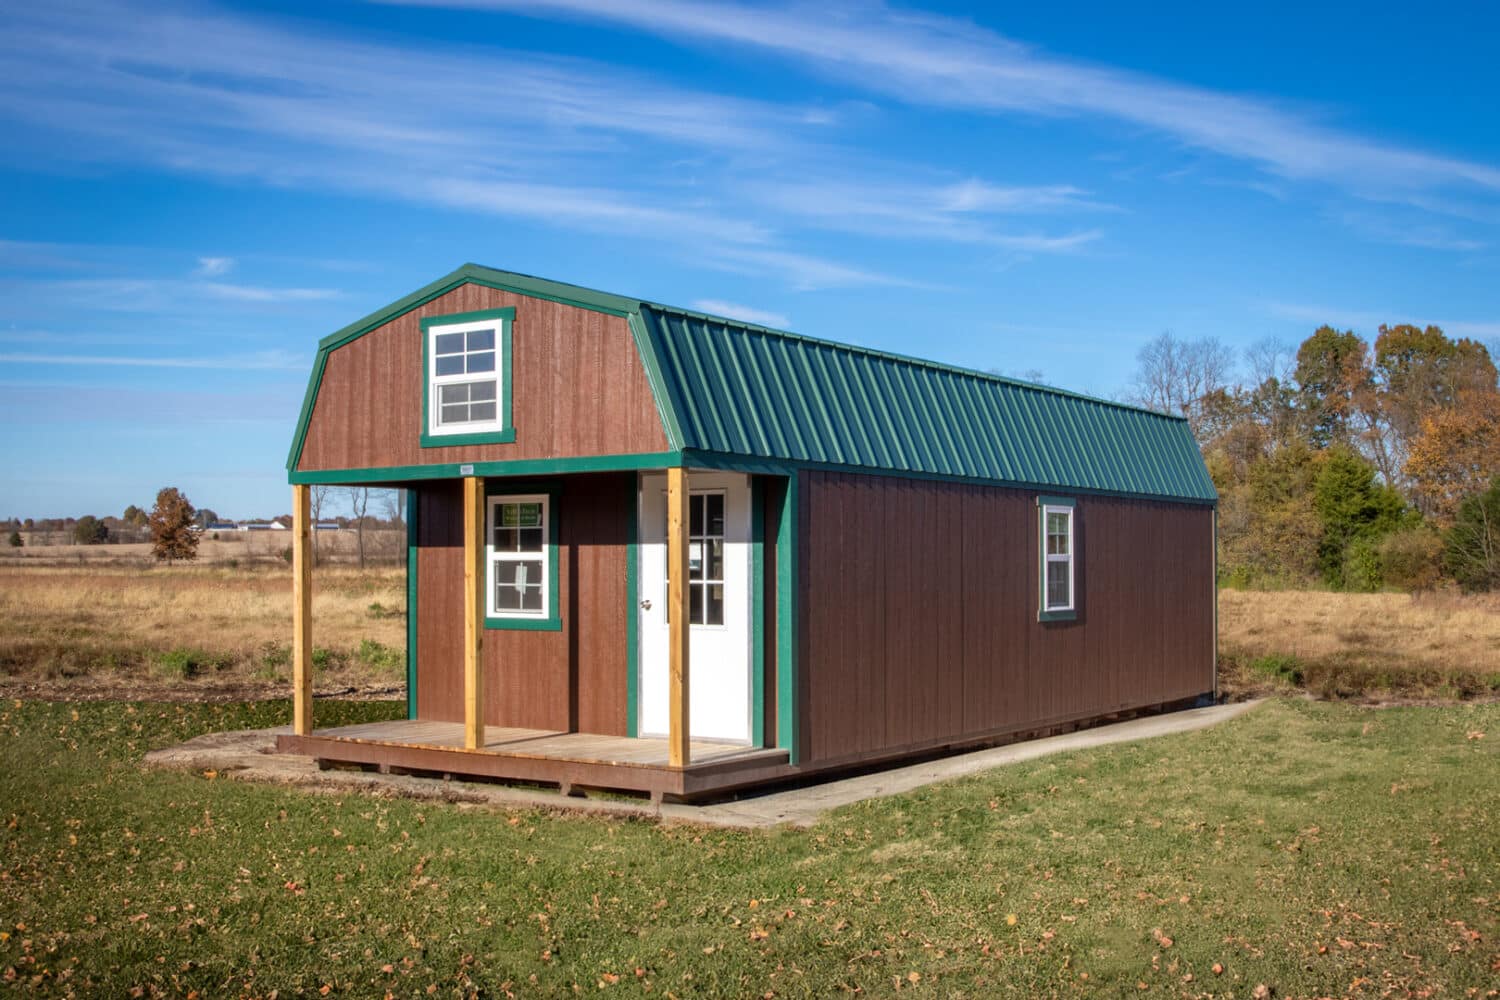 prebuilt-cabins-for-storage-in-holt-summit-mo